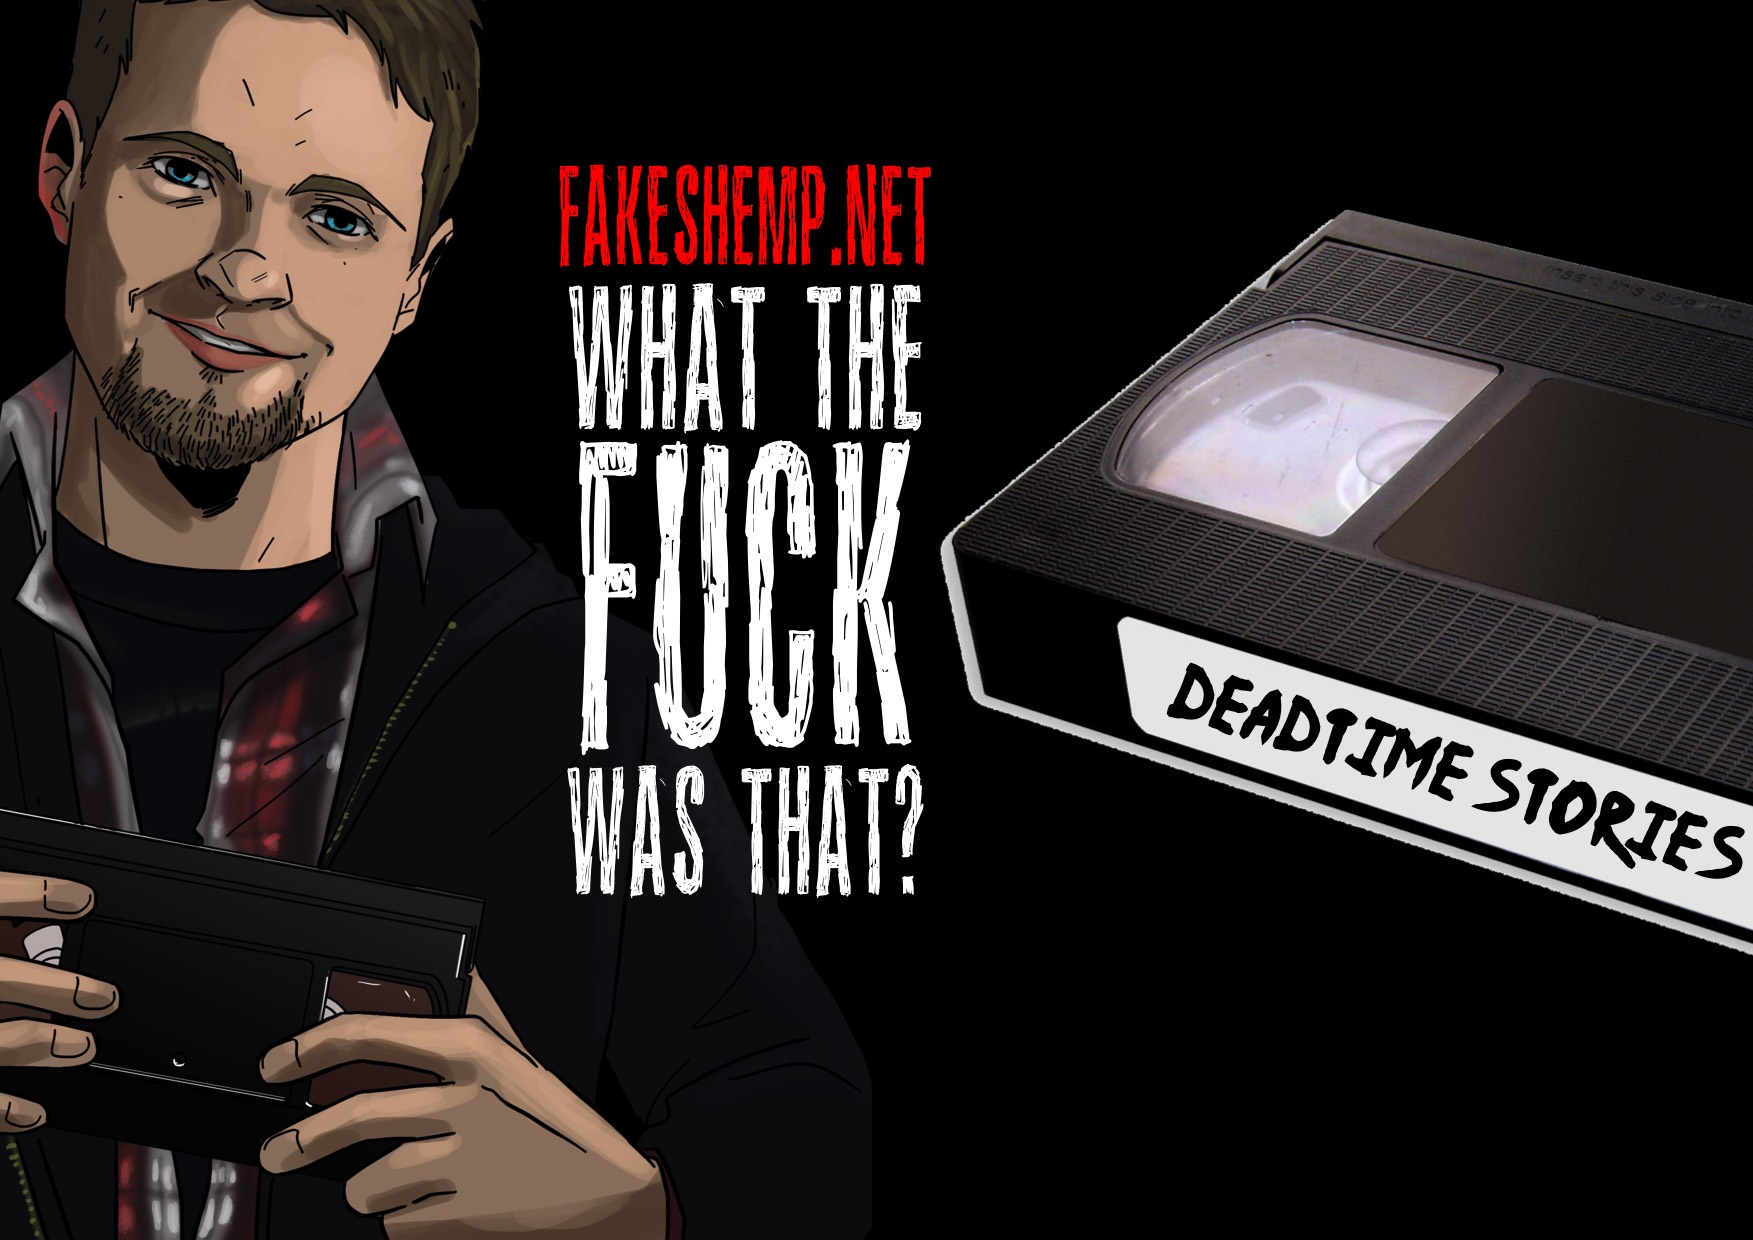 WTF WAS THAT? - Deadtime Stories